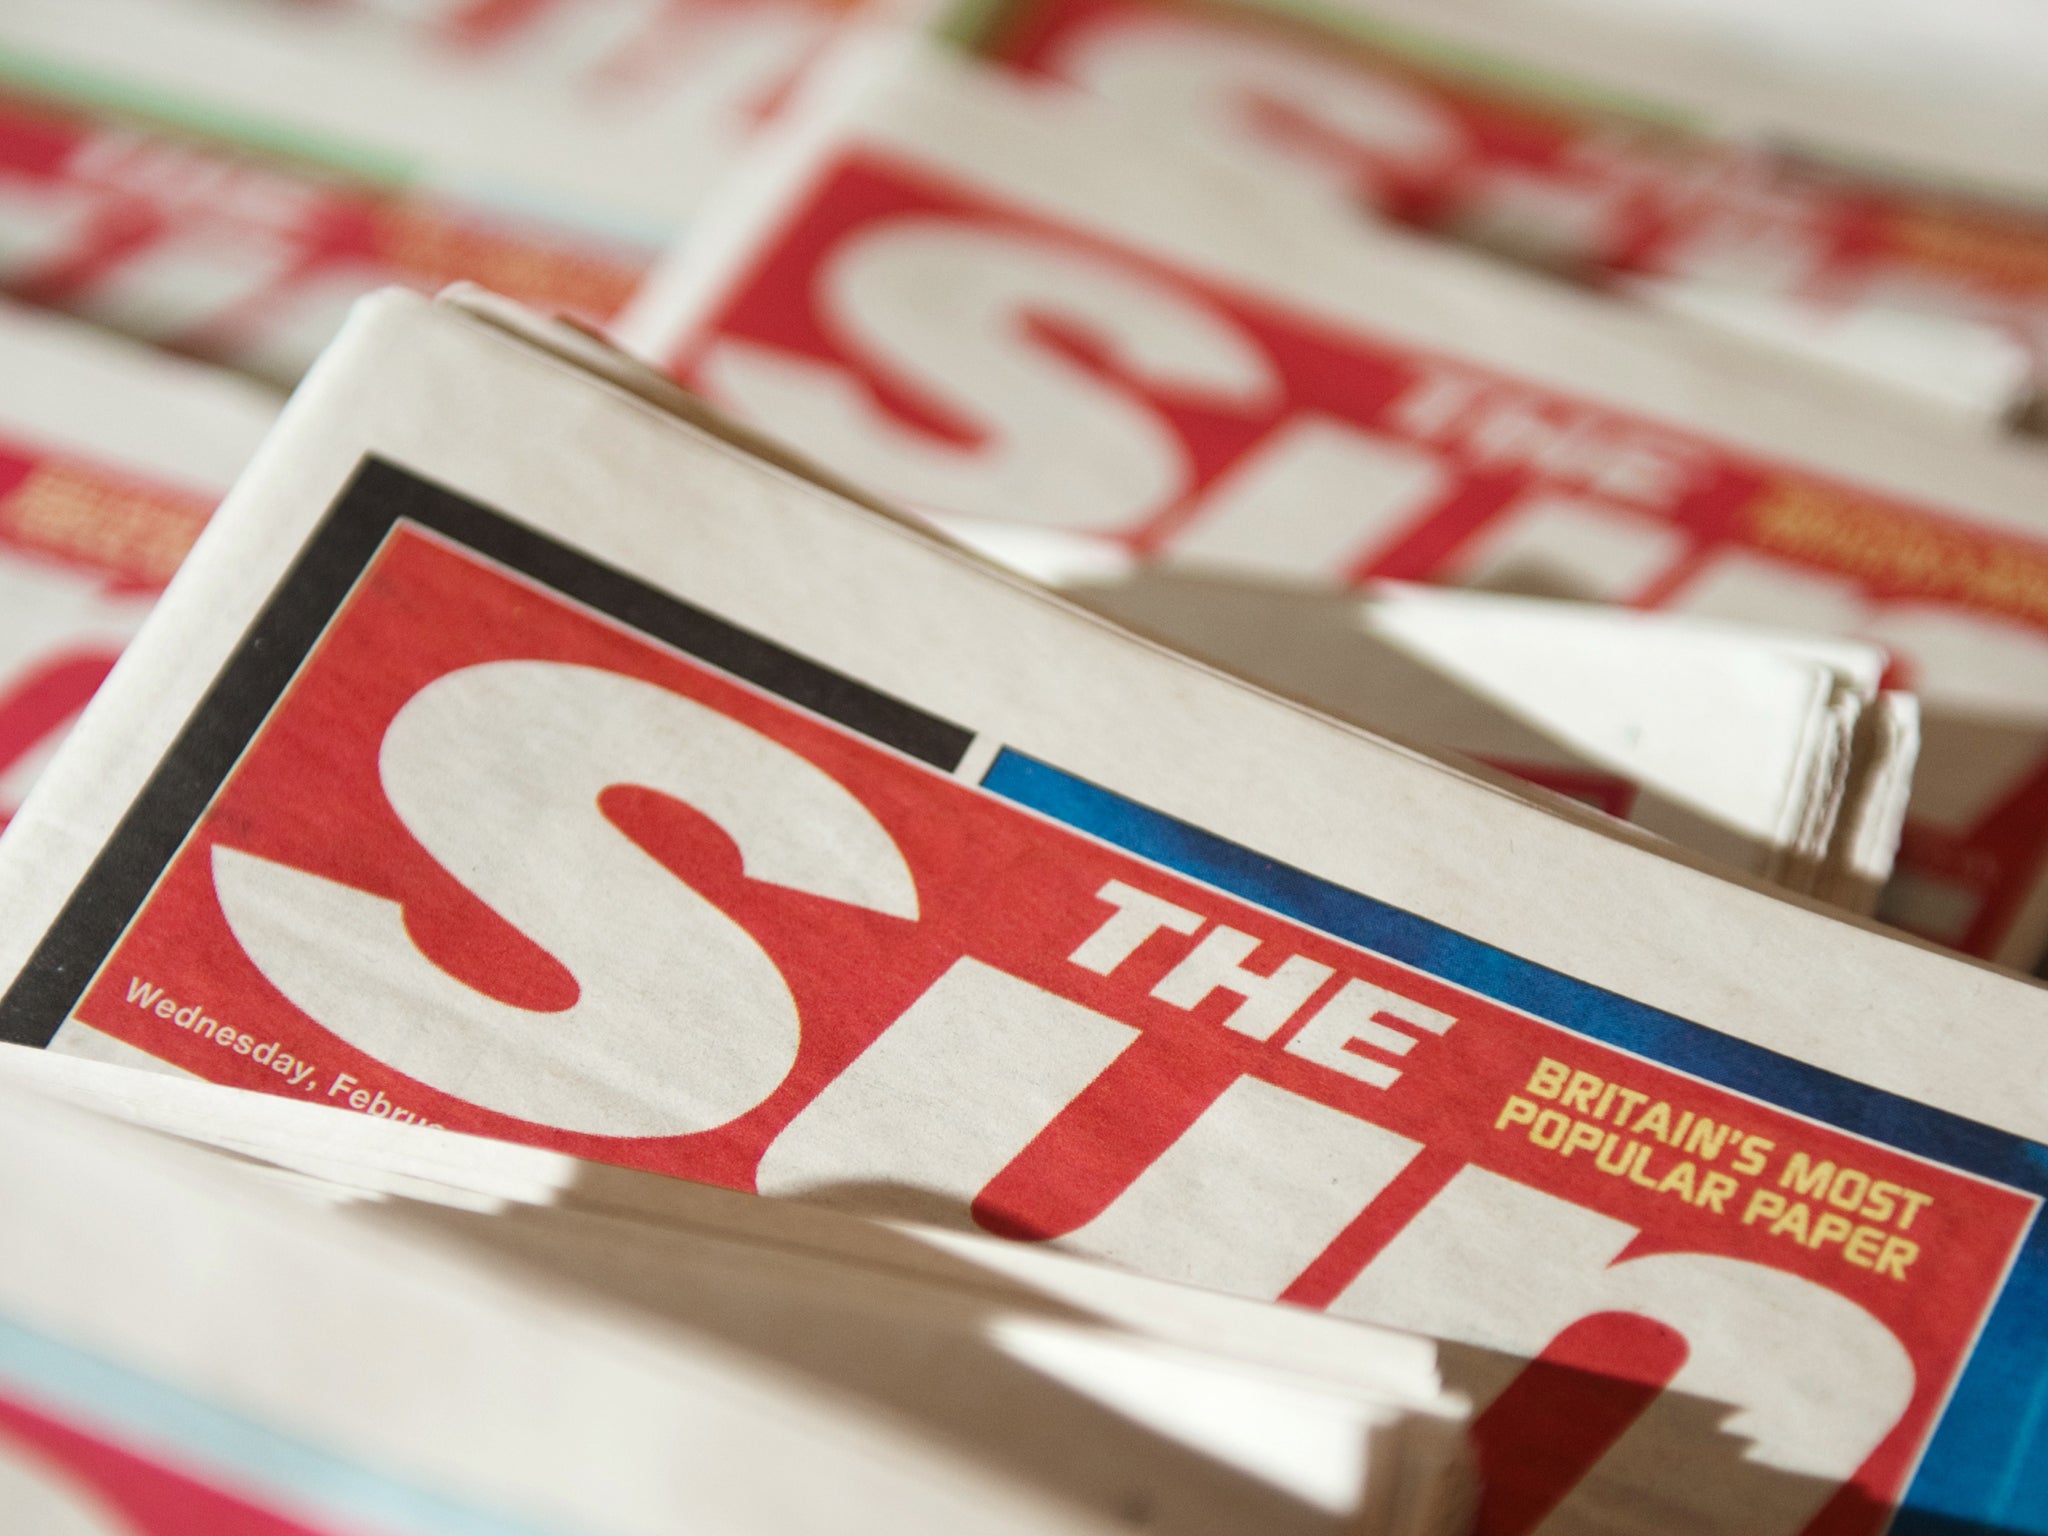 The Sun has been fined more than £3,000 for breaching reporting restrictions